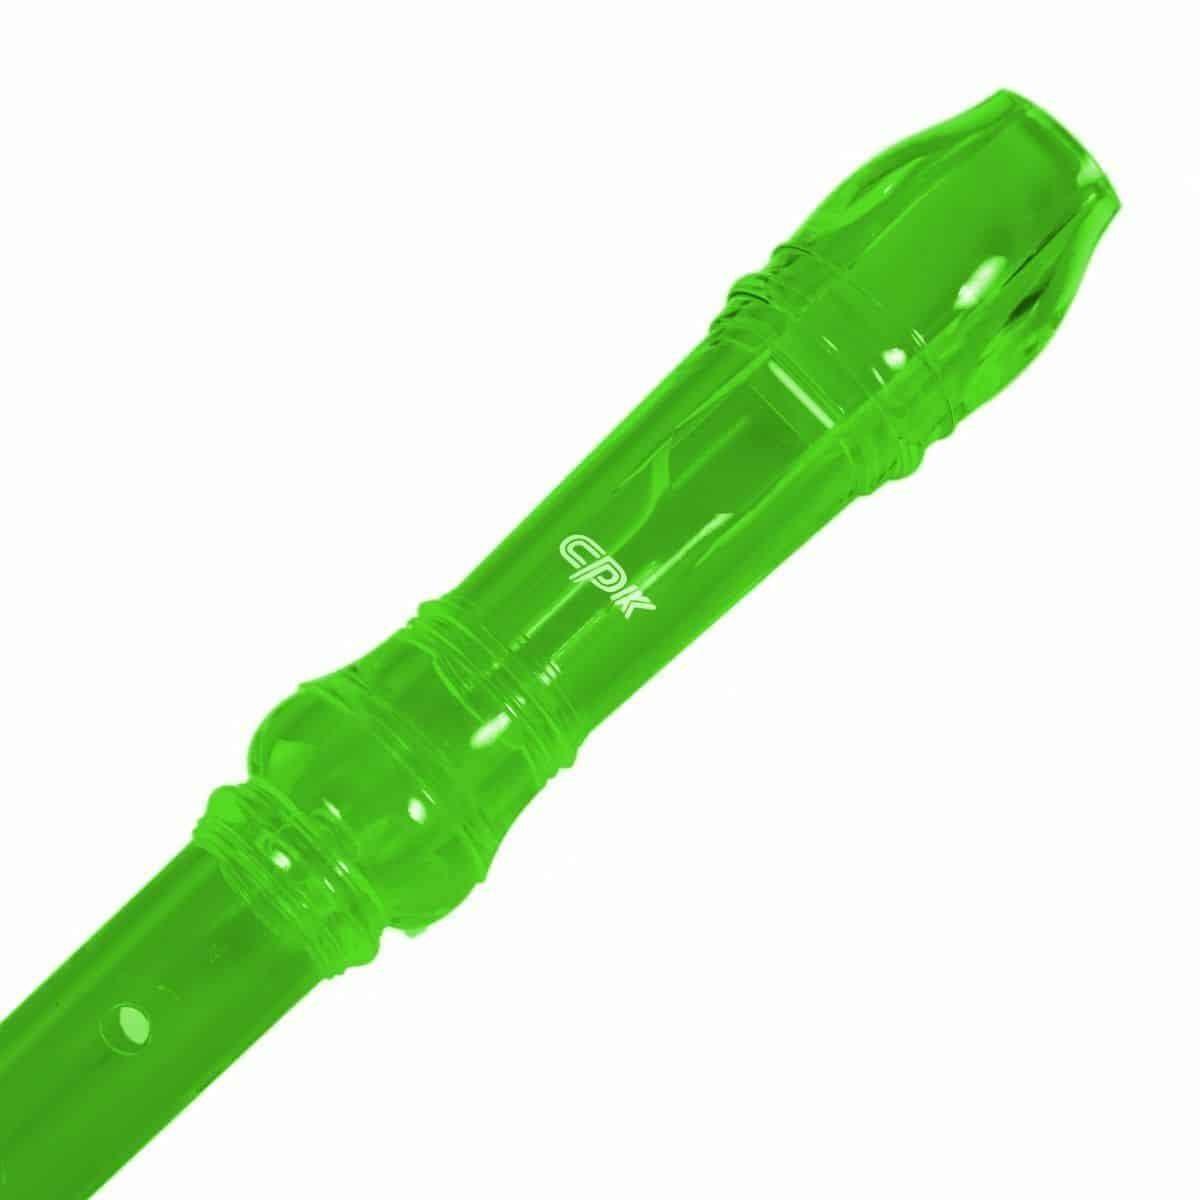 Soprano Recorder 3 Pce Trans Green W/Bag And Rod - Orchestral - Woodwind Section by CPK at Muso's Stuff